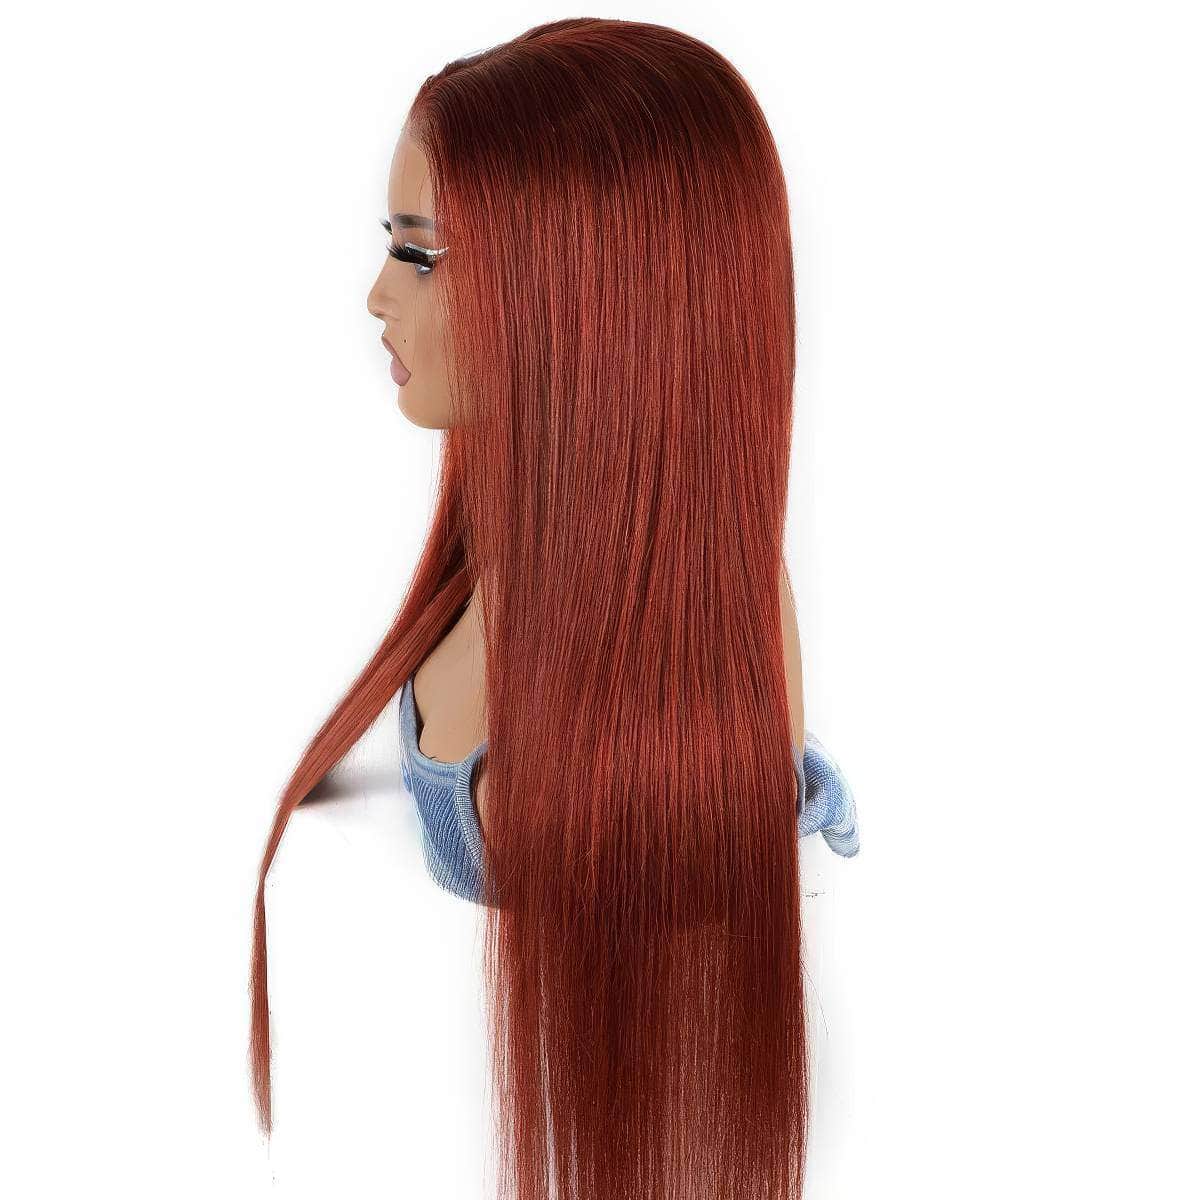 Brazilian Straight Reddish Brown Lace Front Human Hair Wig - Wear And Go, 6x4 Lace, Glueless Wig, Ready To Wear, Color #33